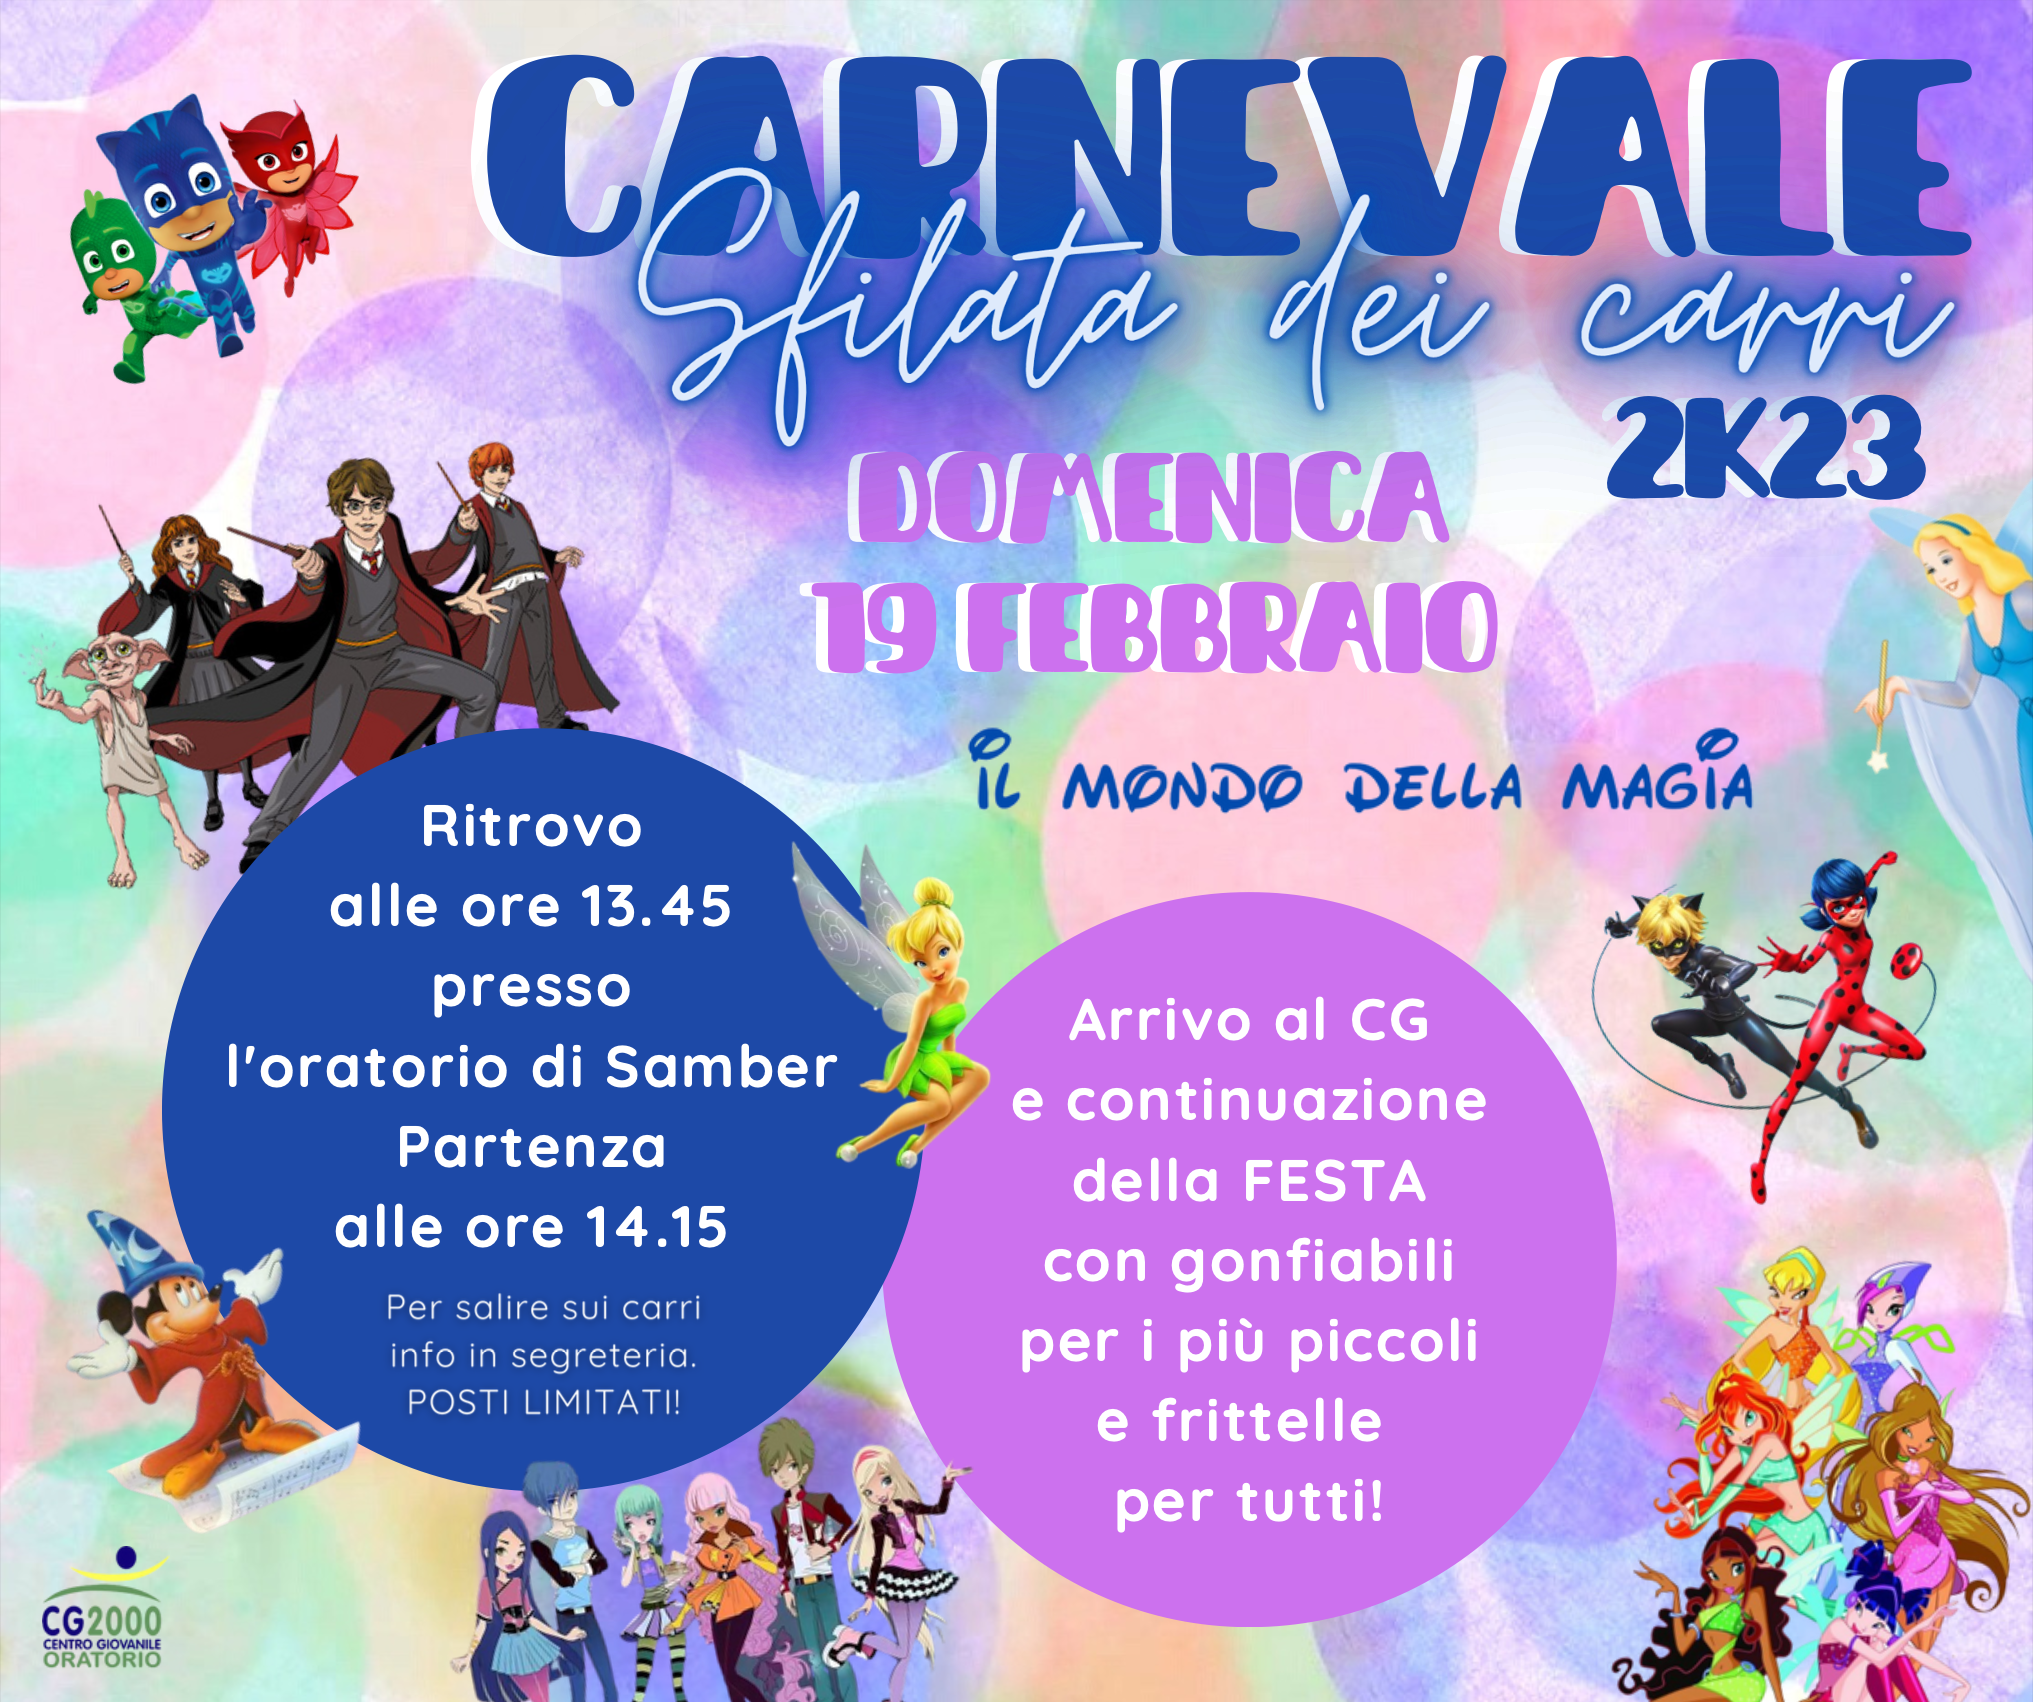 You are currently viewing Carnevale 2023 – Sfilata dei carri